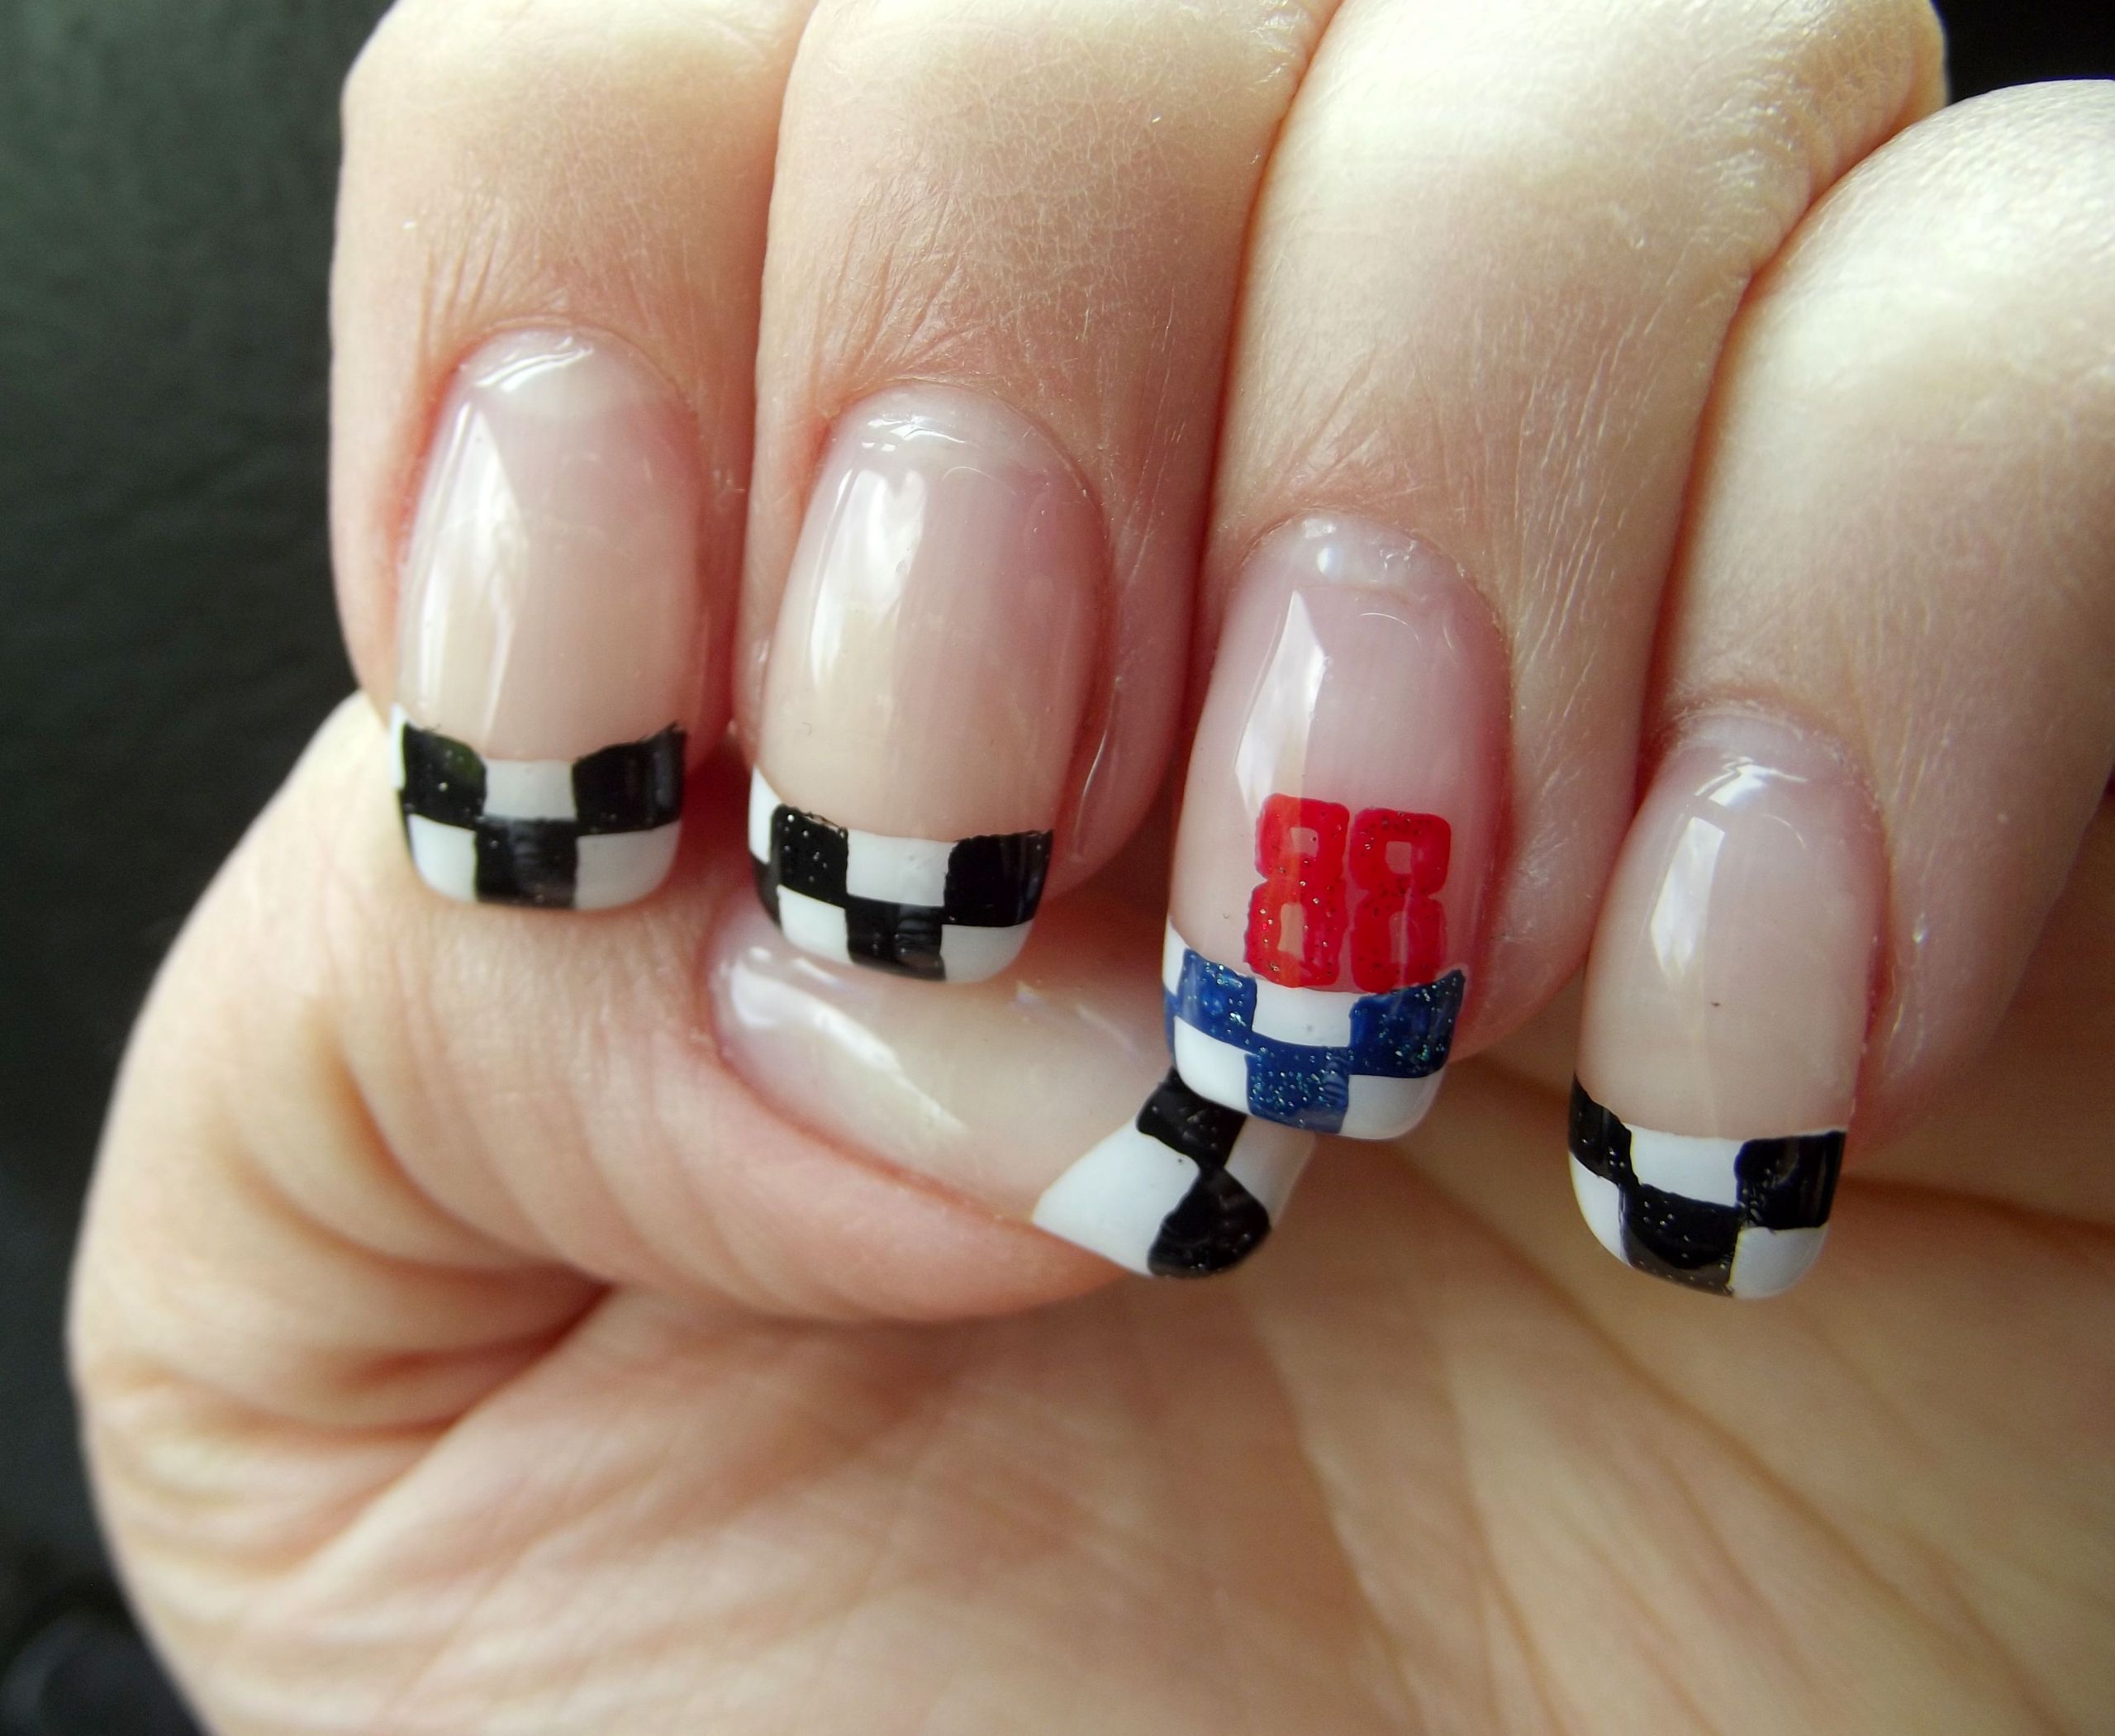 Pretty Nails Oswego Ny
 NASCAR Dale Jr 88 Nail Art Not bad for doing it on